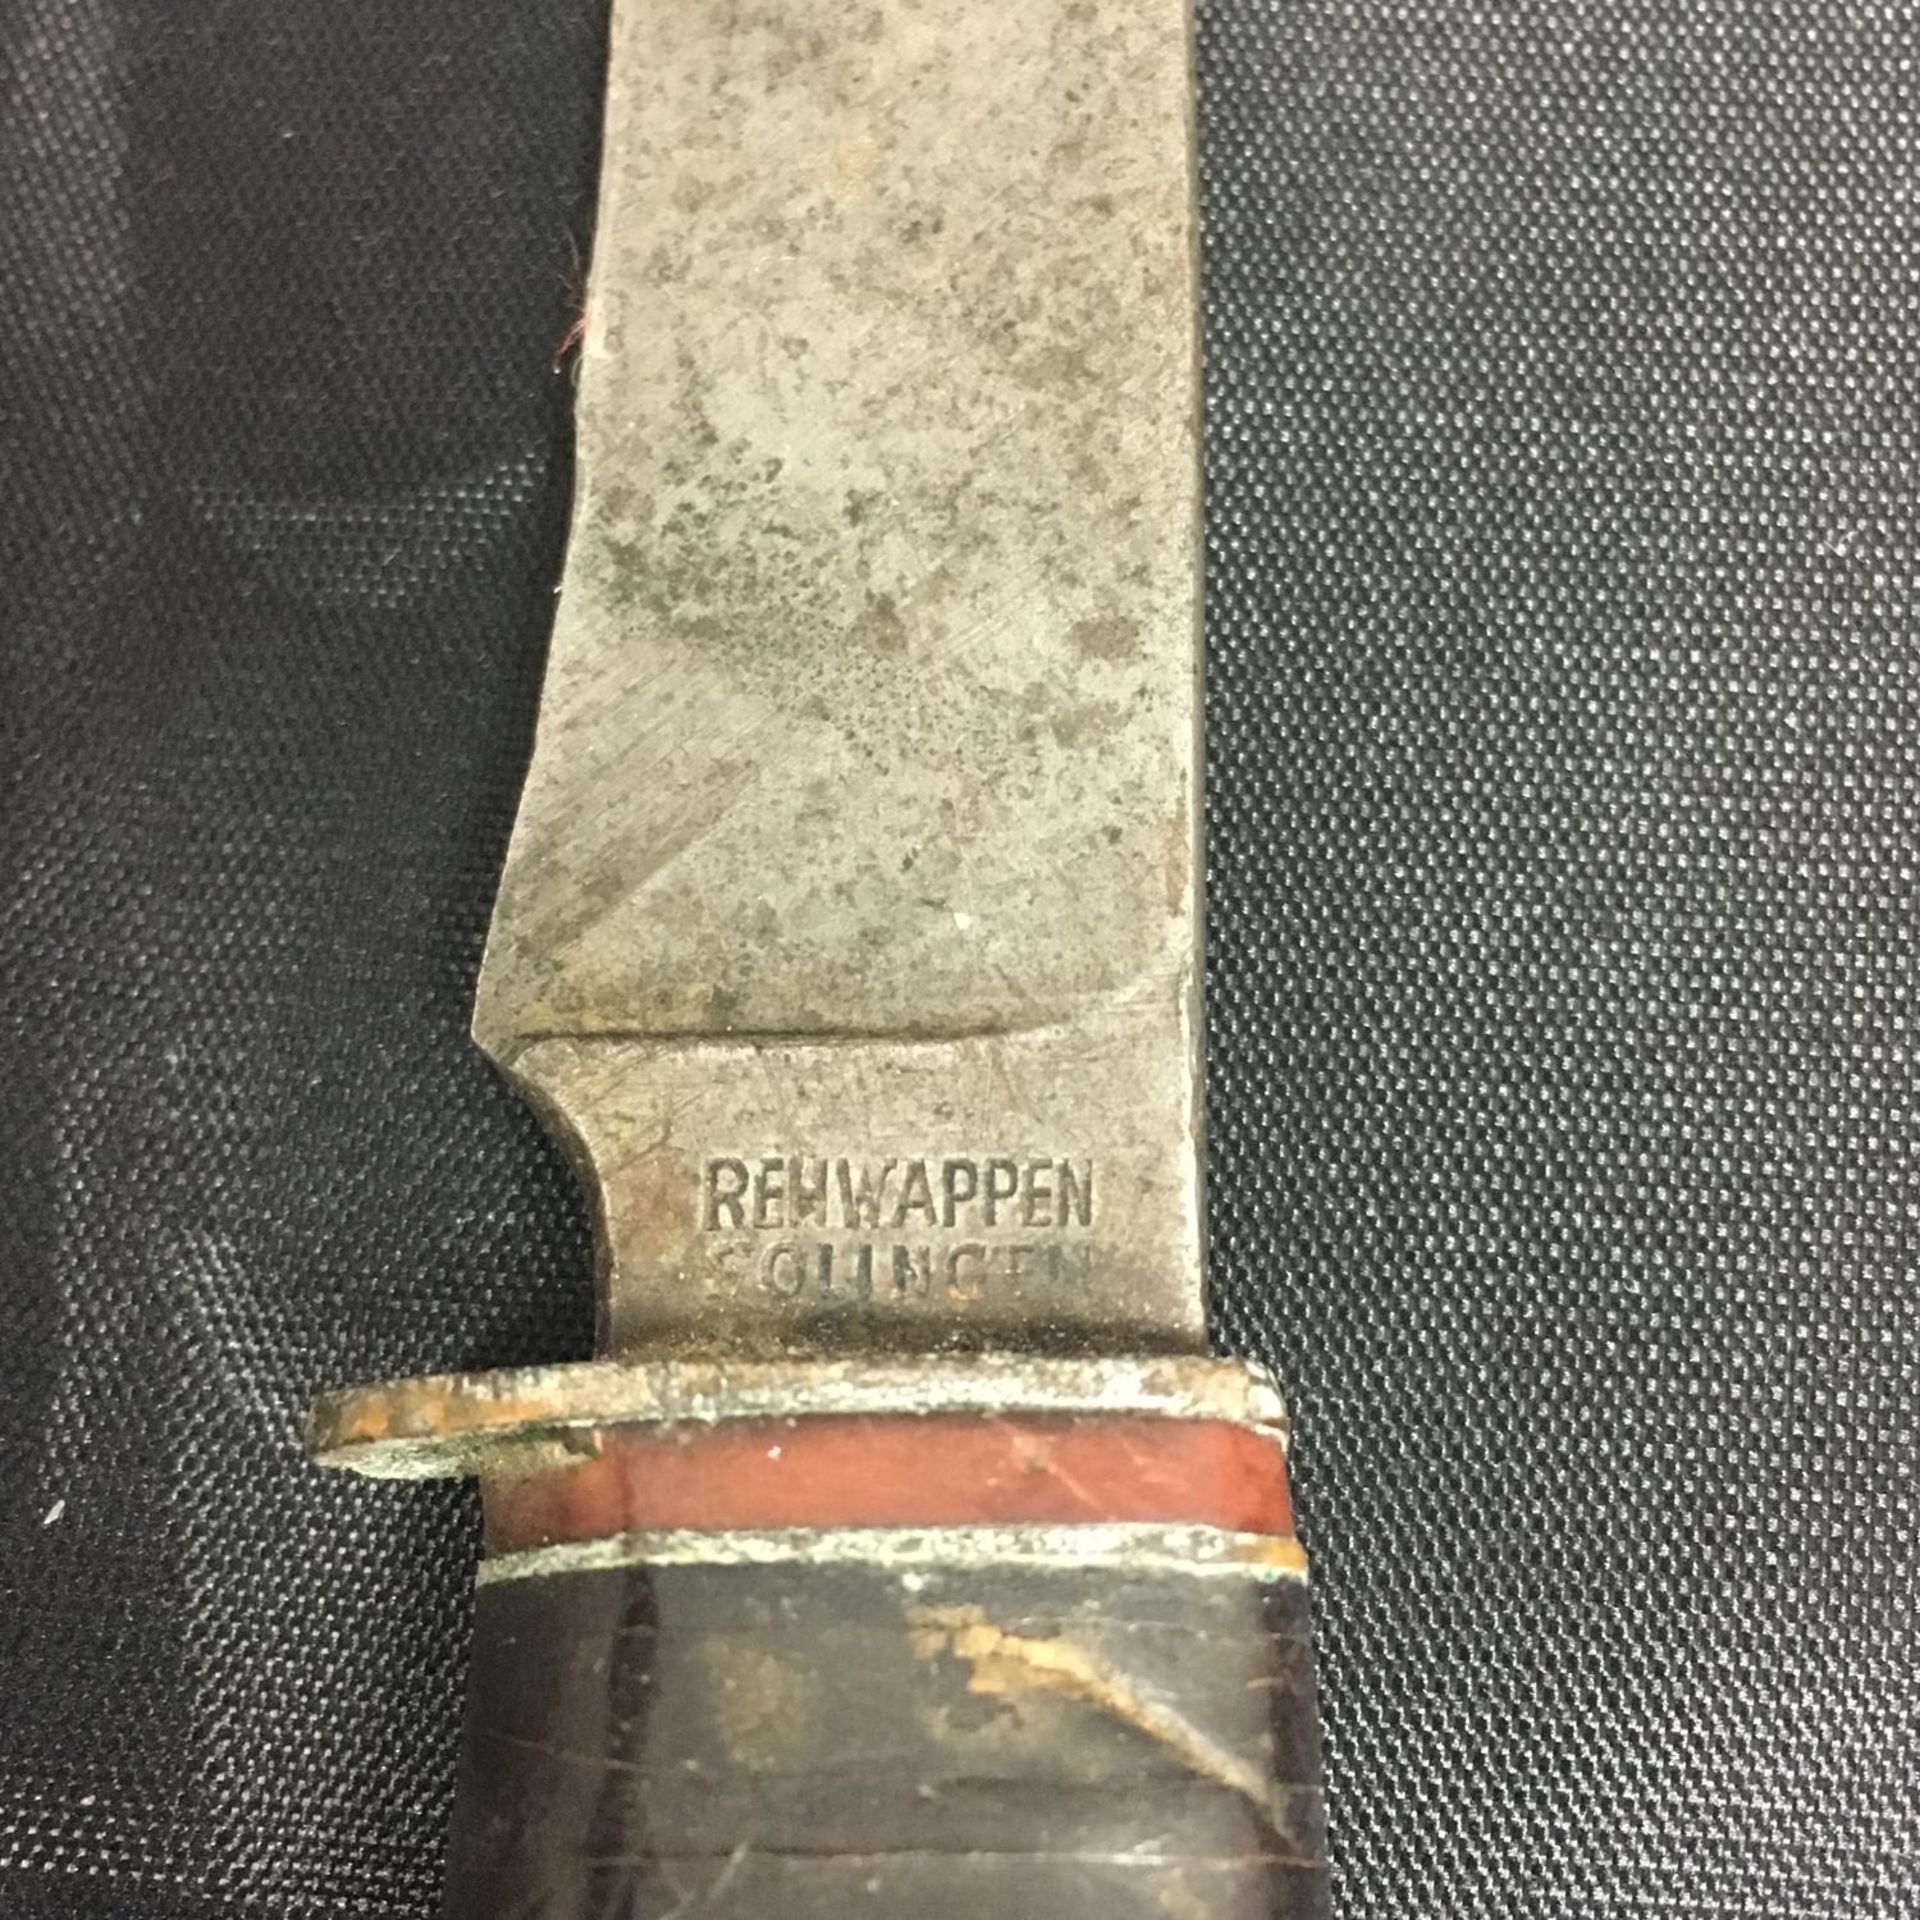 VINTAGE GERMAN HUNTING KNIFE. Made by Rehwappen - Solingen. Scarce and highly collectable item. - Image 3 of 3